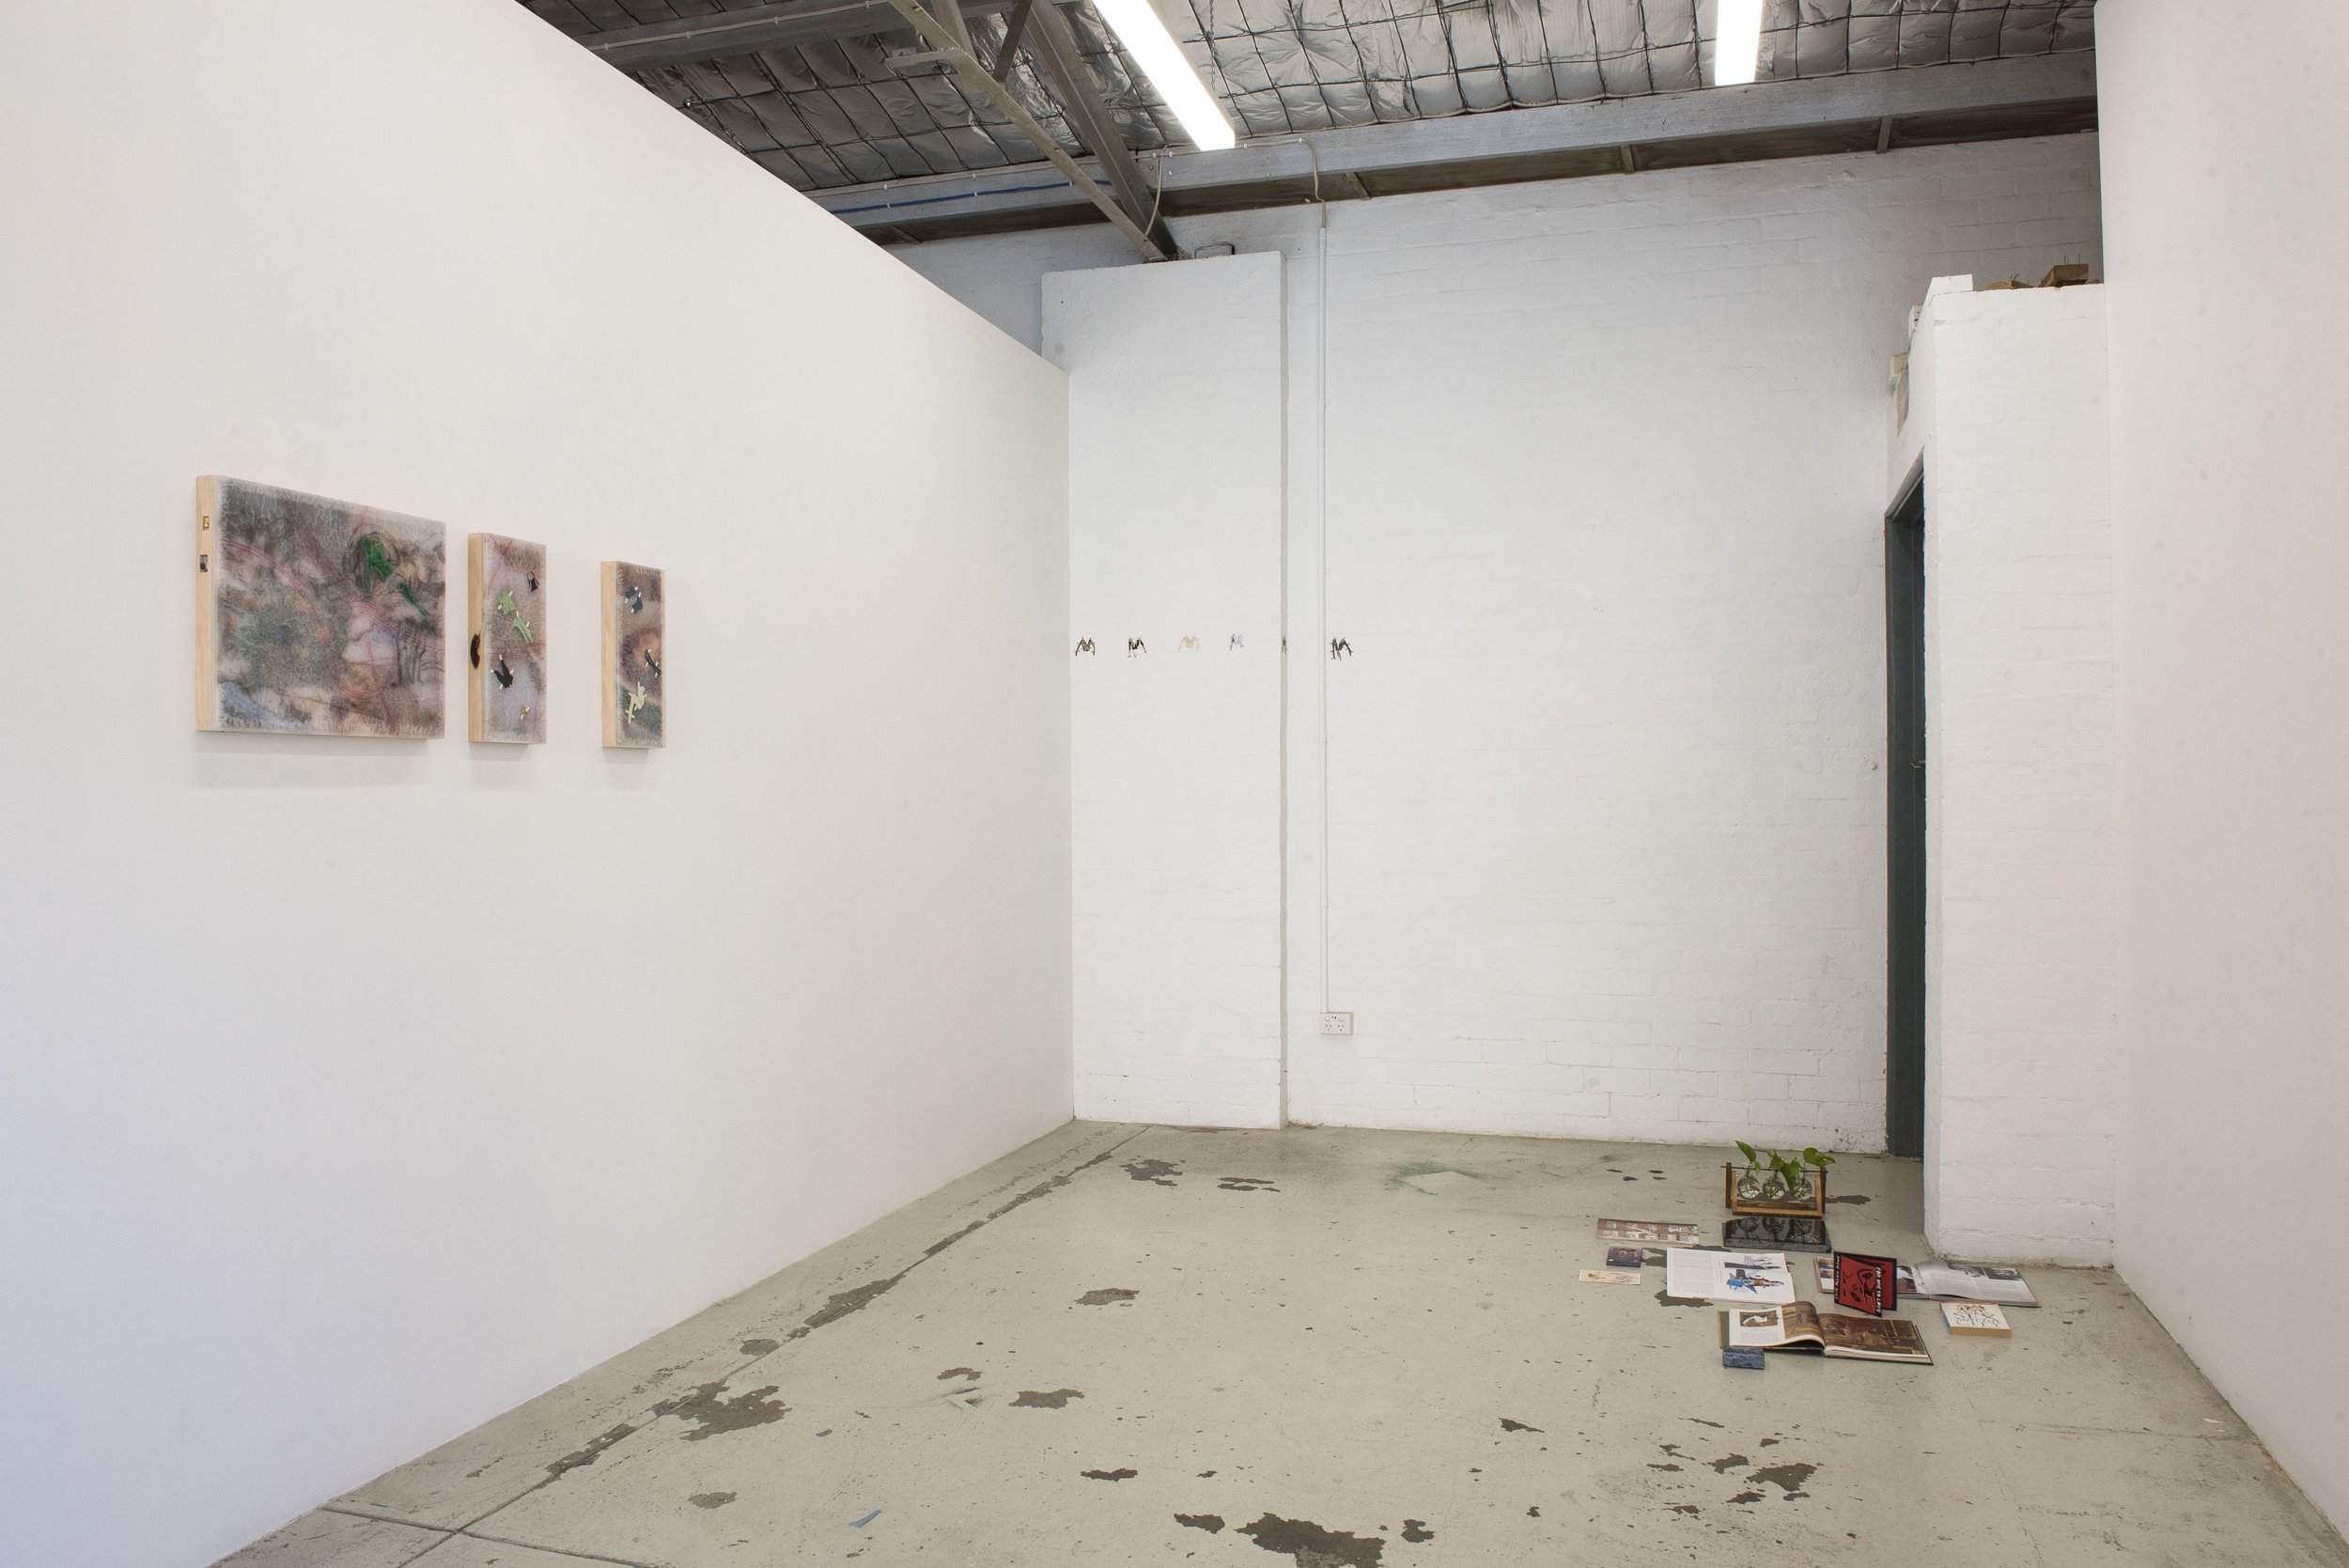   panoply (she dresses up like that to go out for noodles?)    Installation view at TCB.   Image courtesy of Jordan Halsall. 